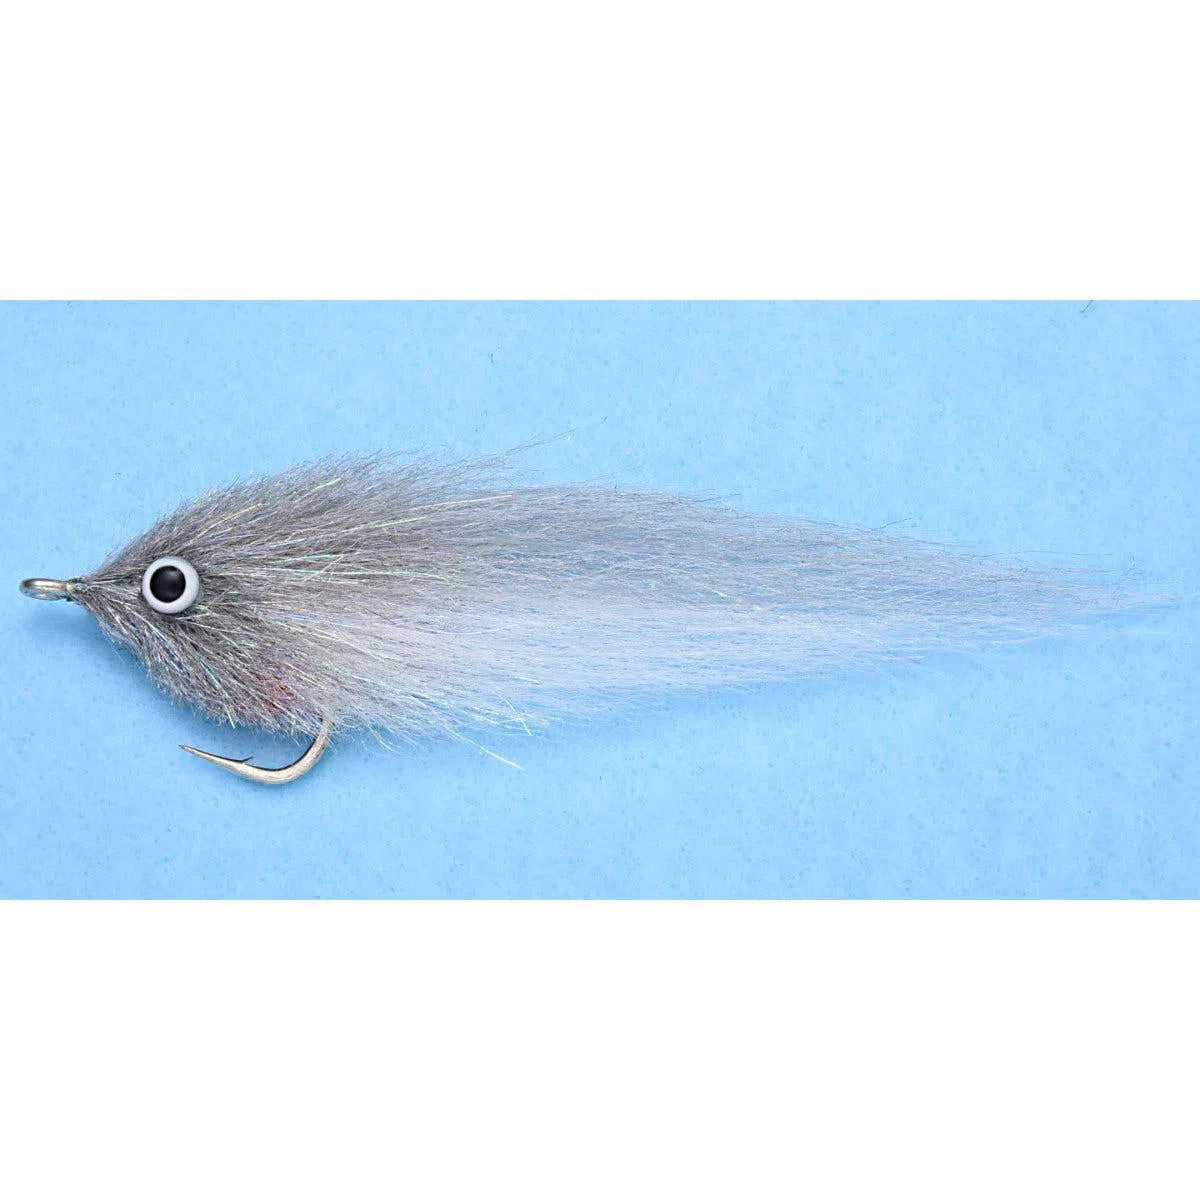 Enrico Puglisi EP GT Baitfish Fly-Lure - Fly-Enrico Puglisi-Grey-Size #8/0-Fishing Station